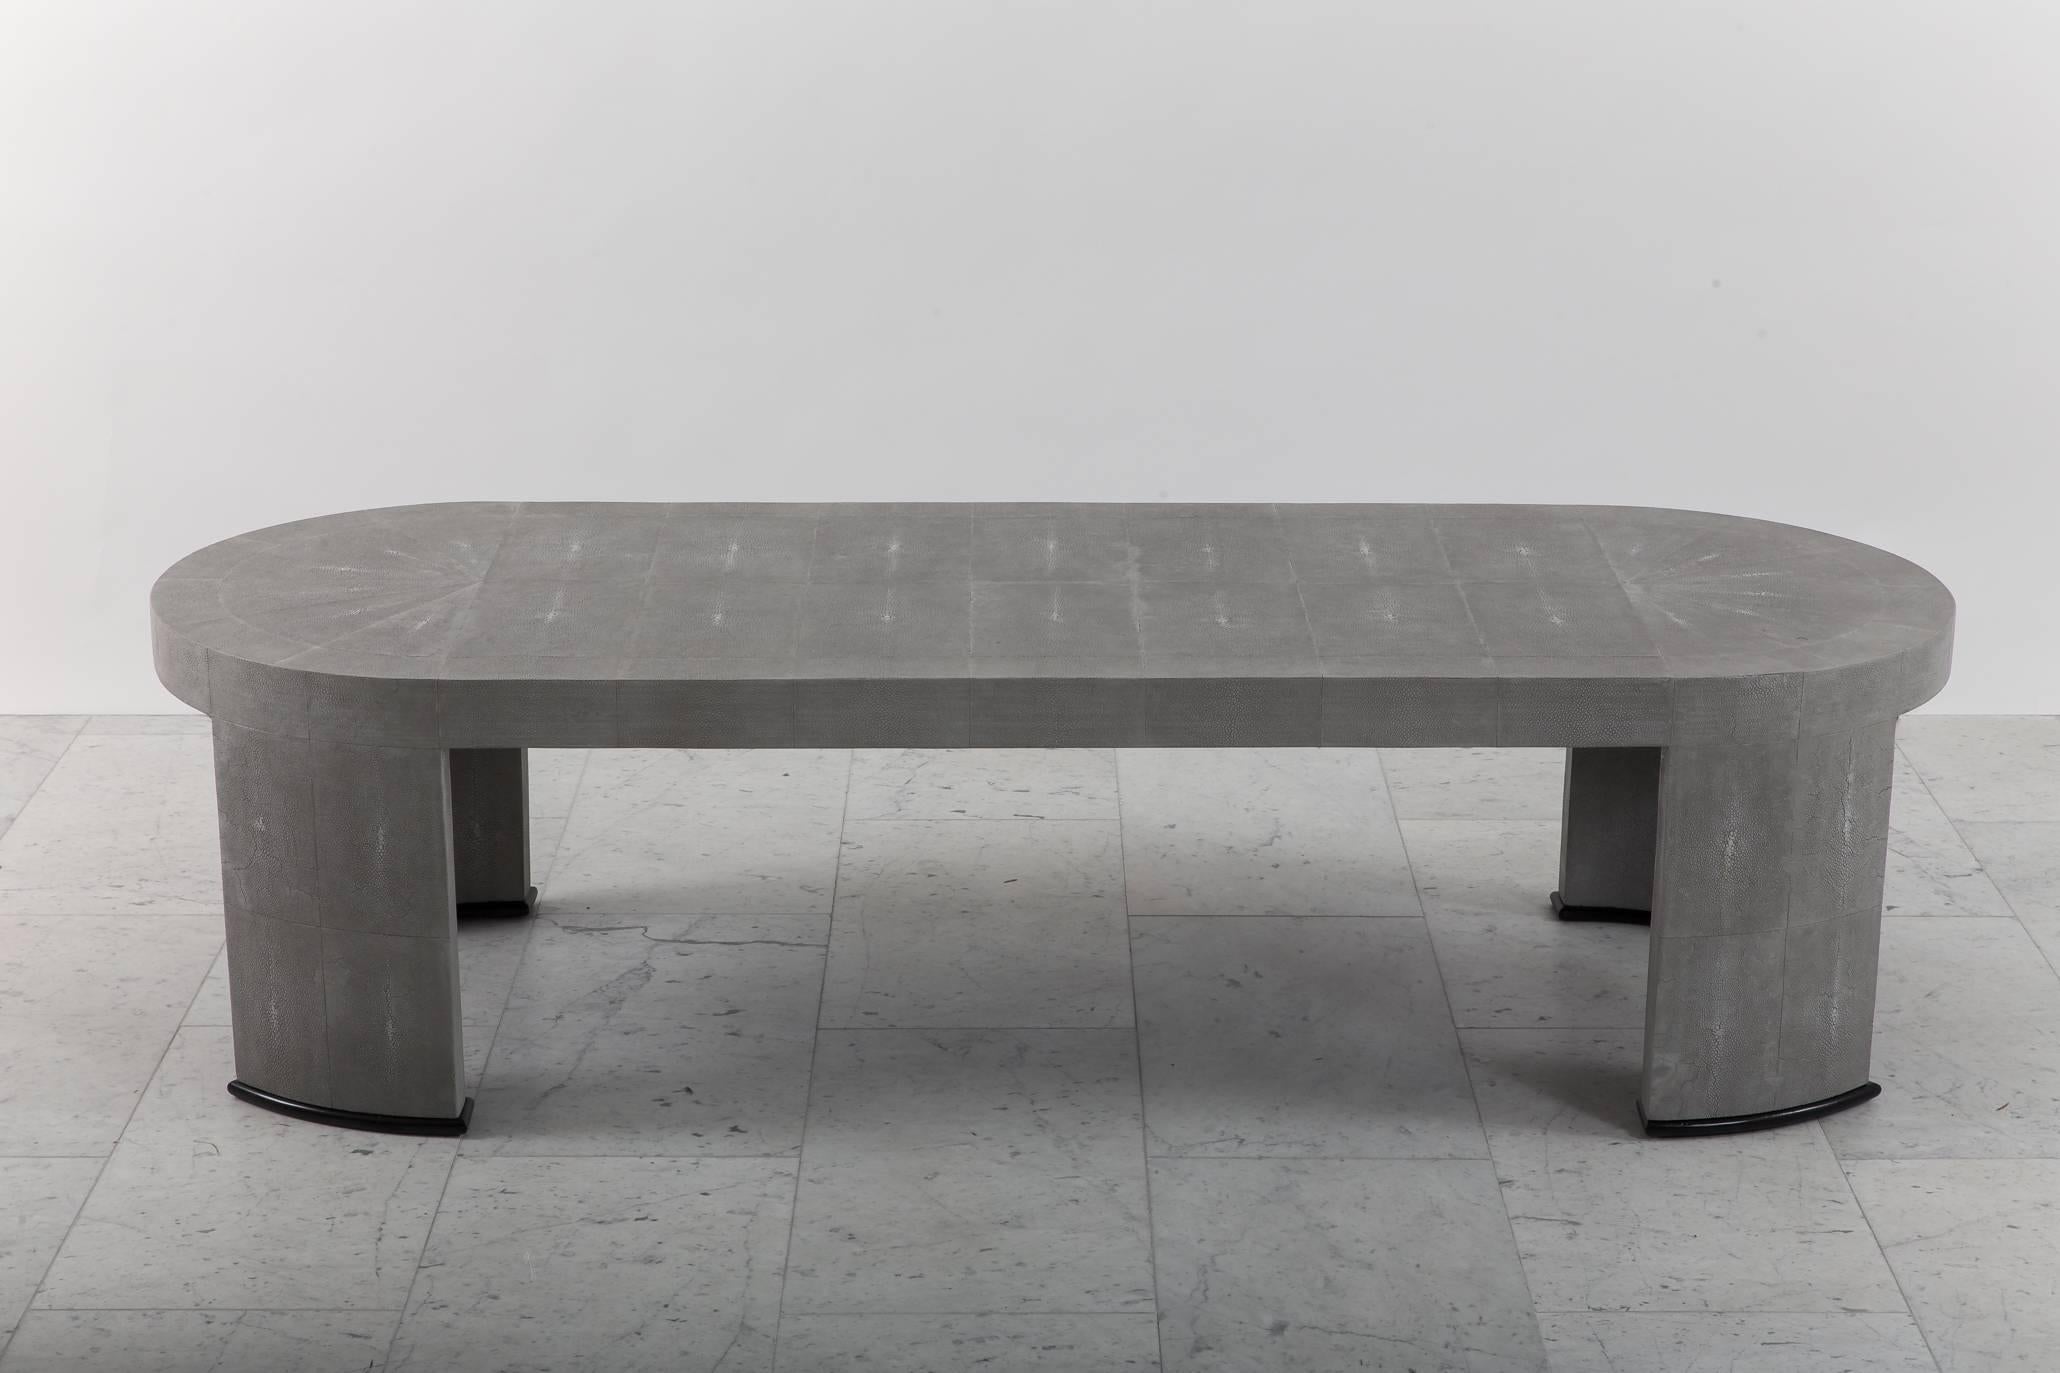 A long and elegant racetrack low table in grey shagreen with ebonized mahogany sabots. Epitomizing Seff’s masterful use of exotic skins and demure, curvaceous designs, the table is from the original production and is in excellent condition.

Todd